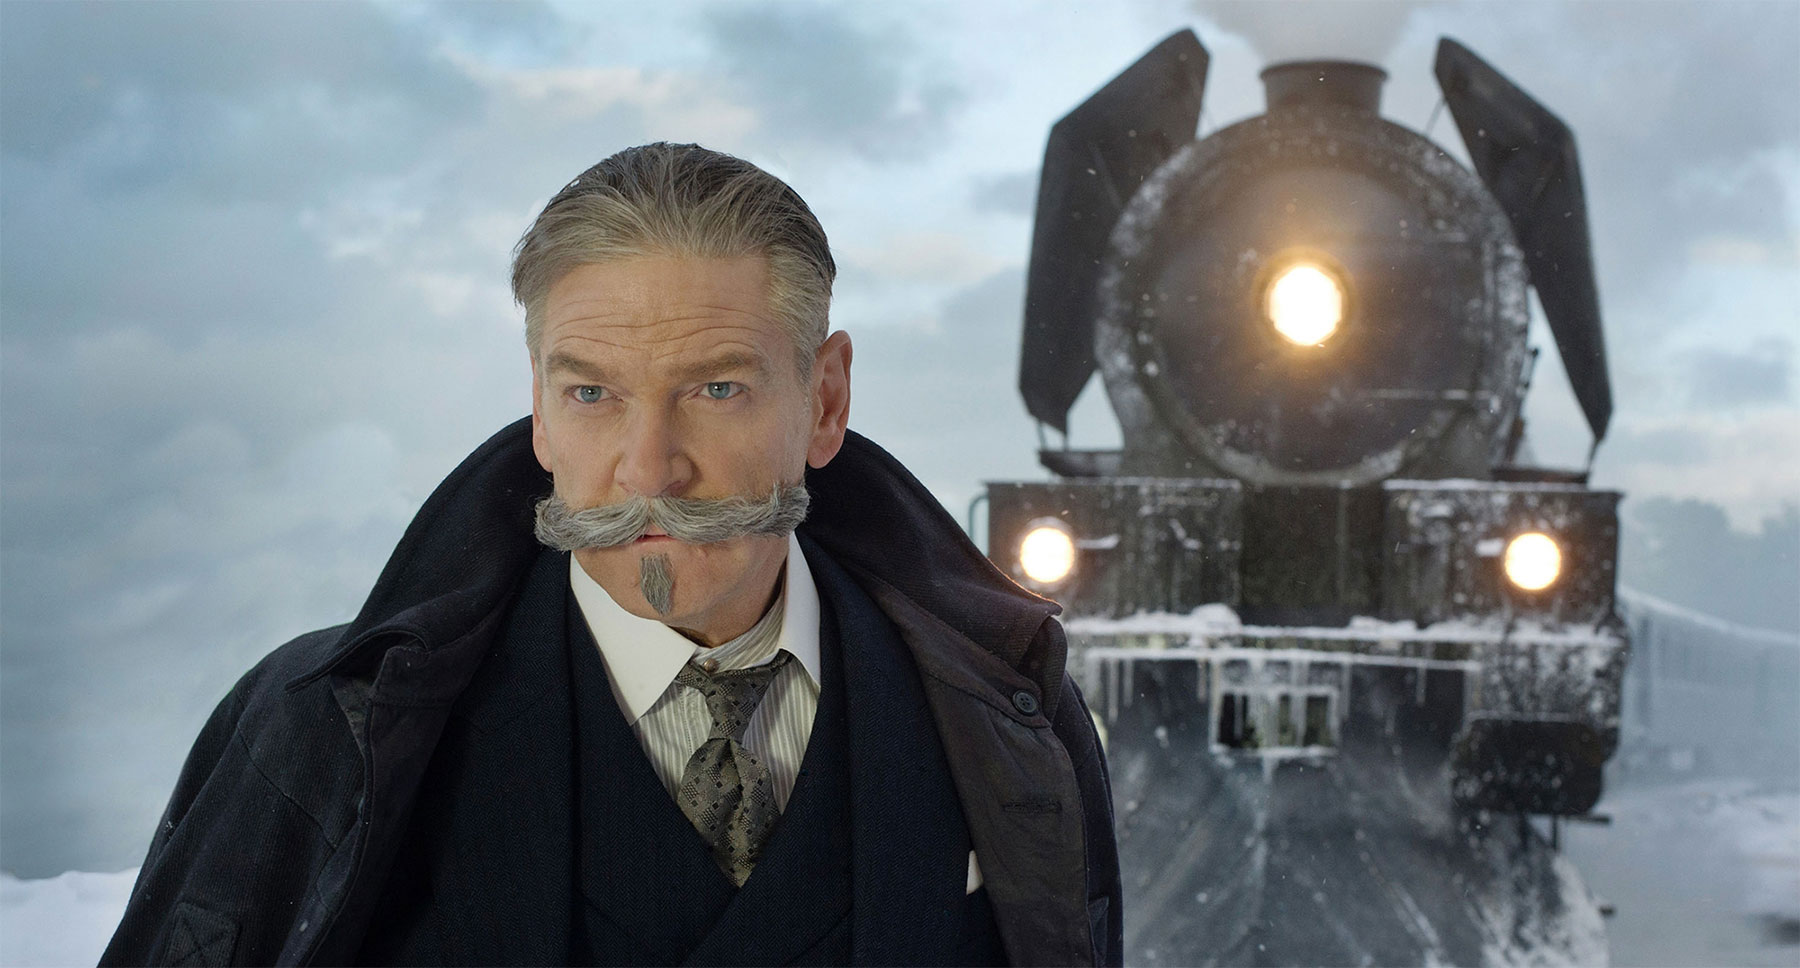 Murder on the Orient Express, movie review, Lucas mirabella